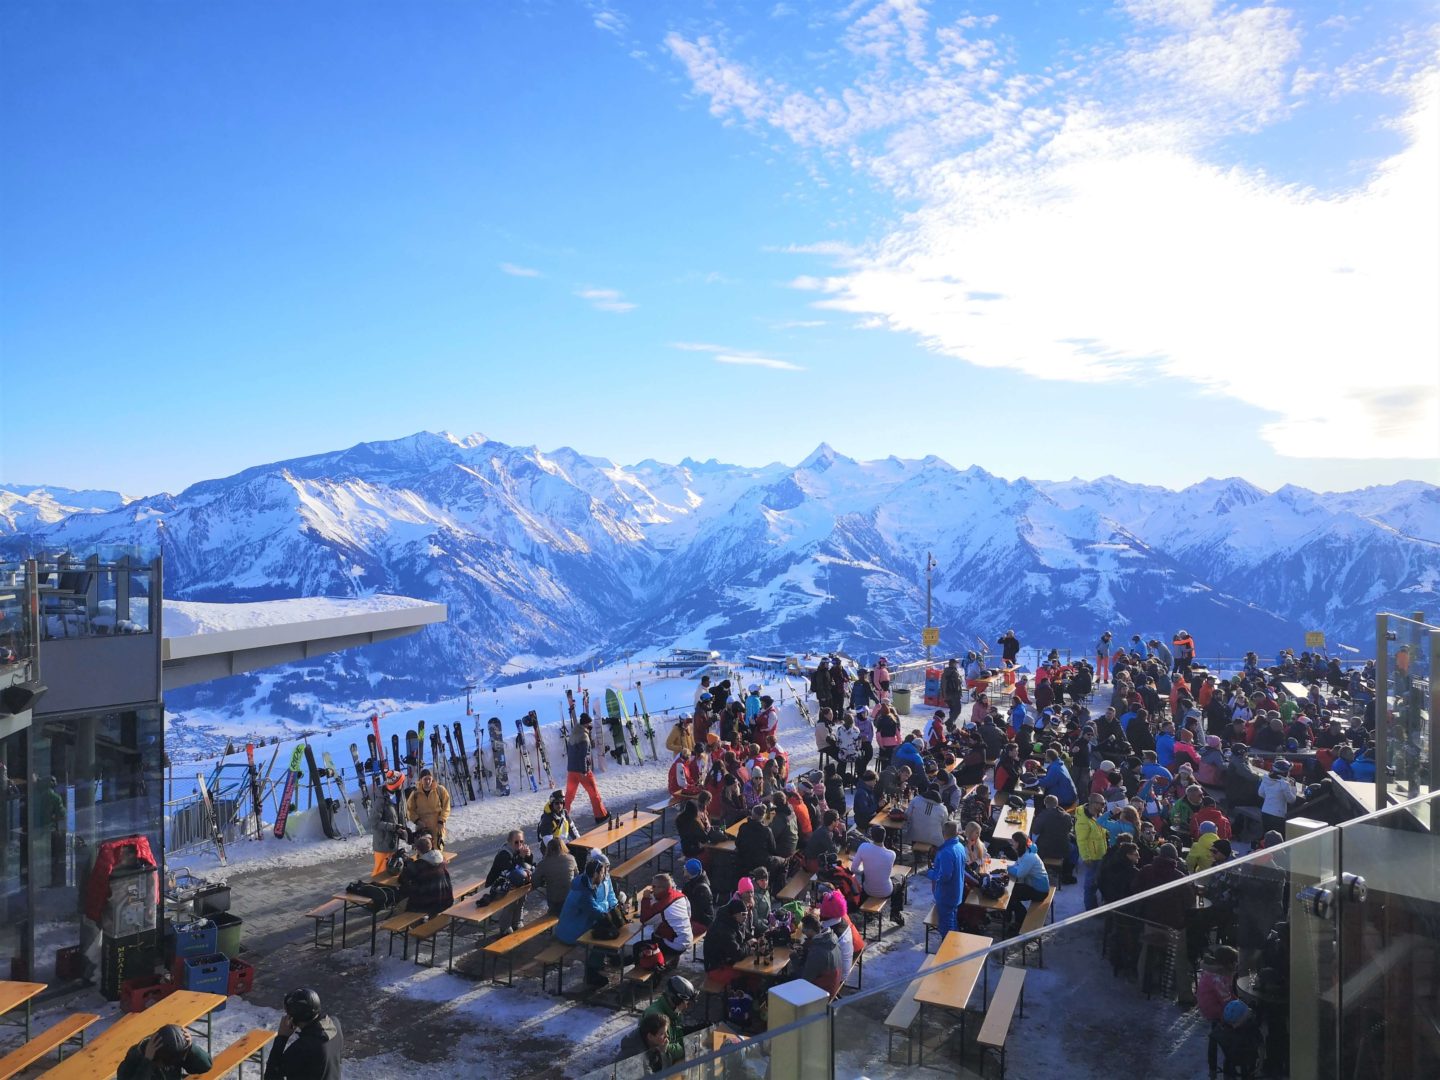 A crowd of people drinking and having fun during apres ski on top of a mountain.